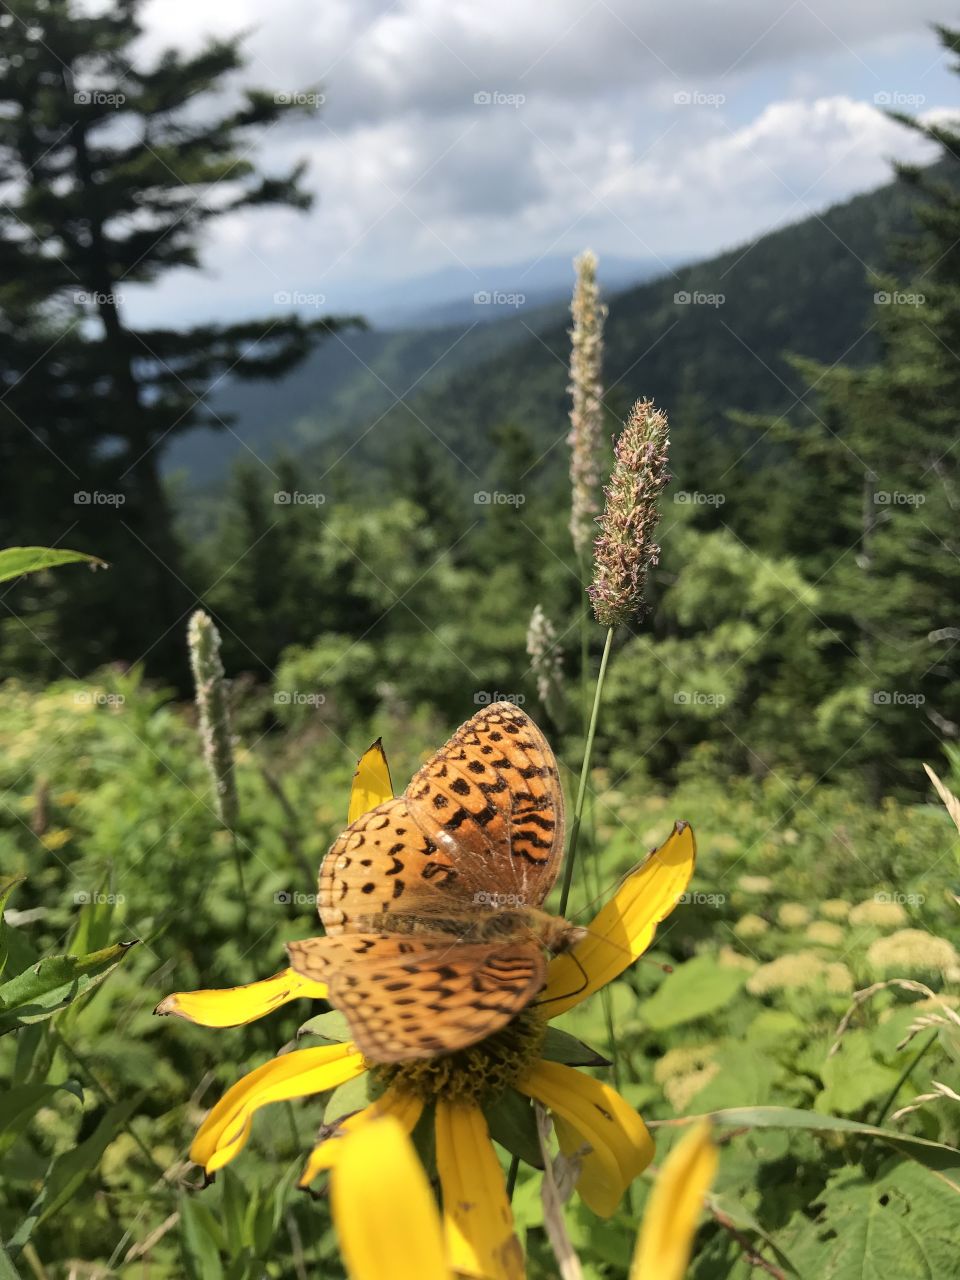 Butterfly with terrific scenery 